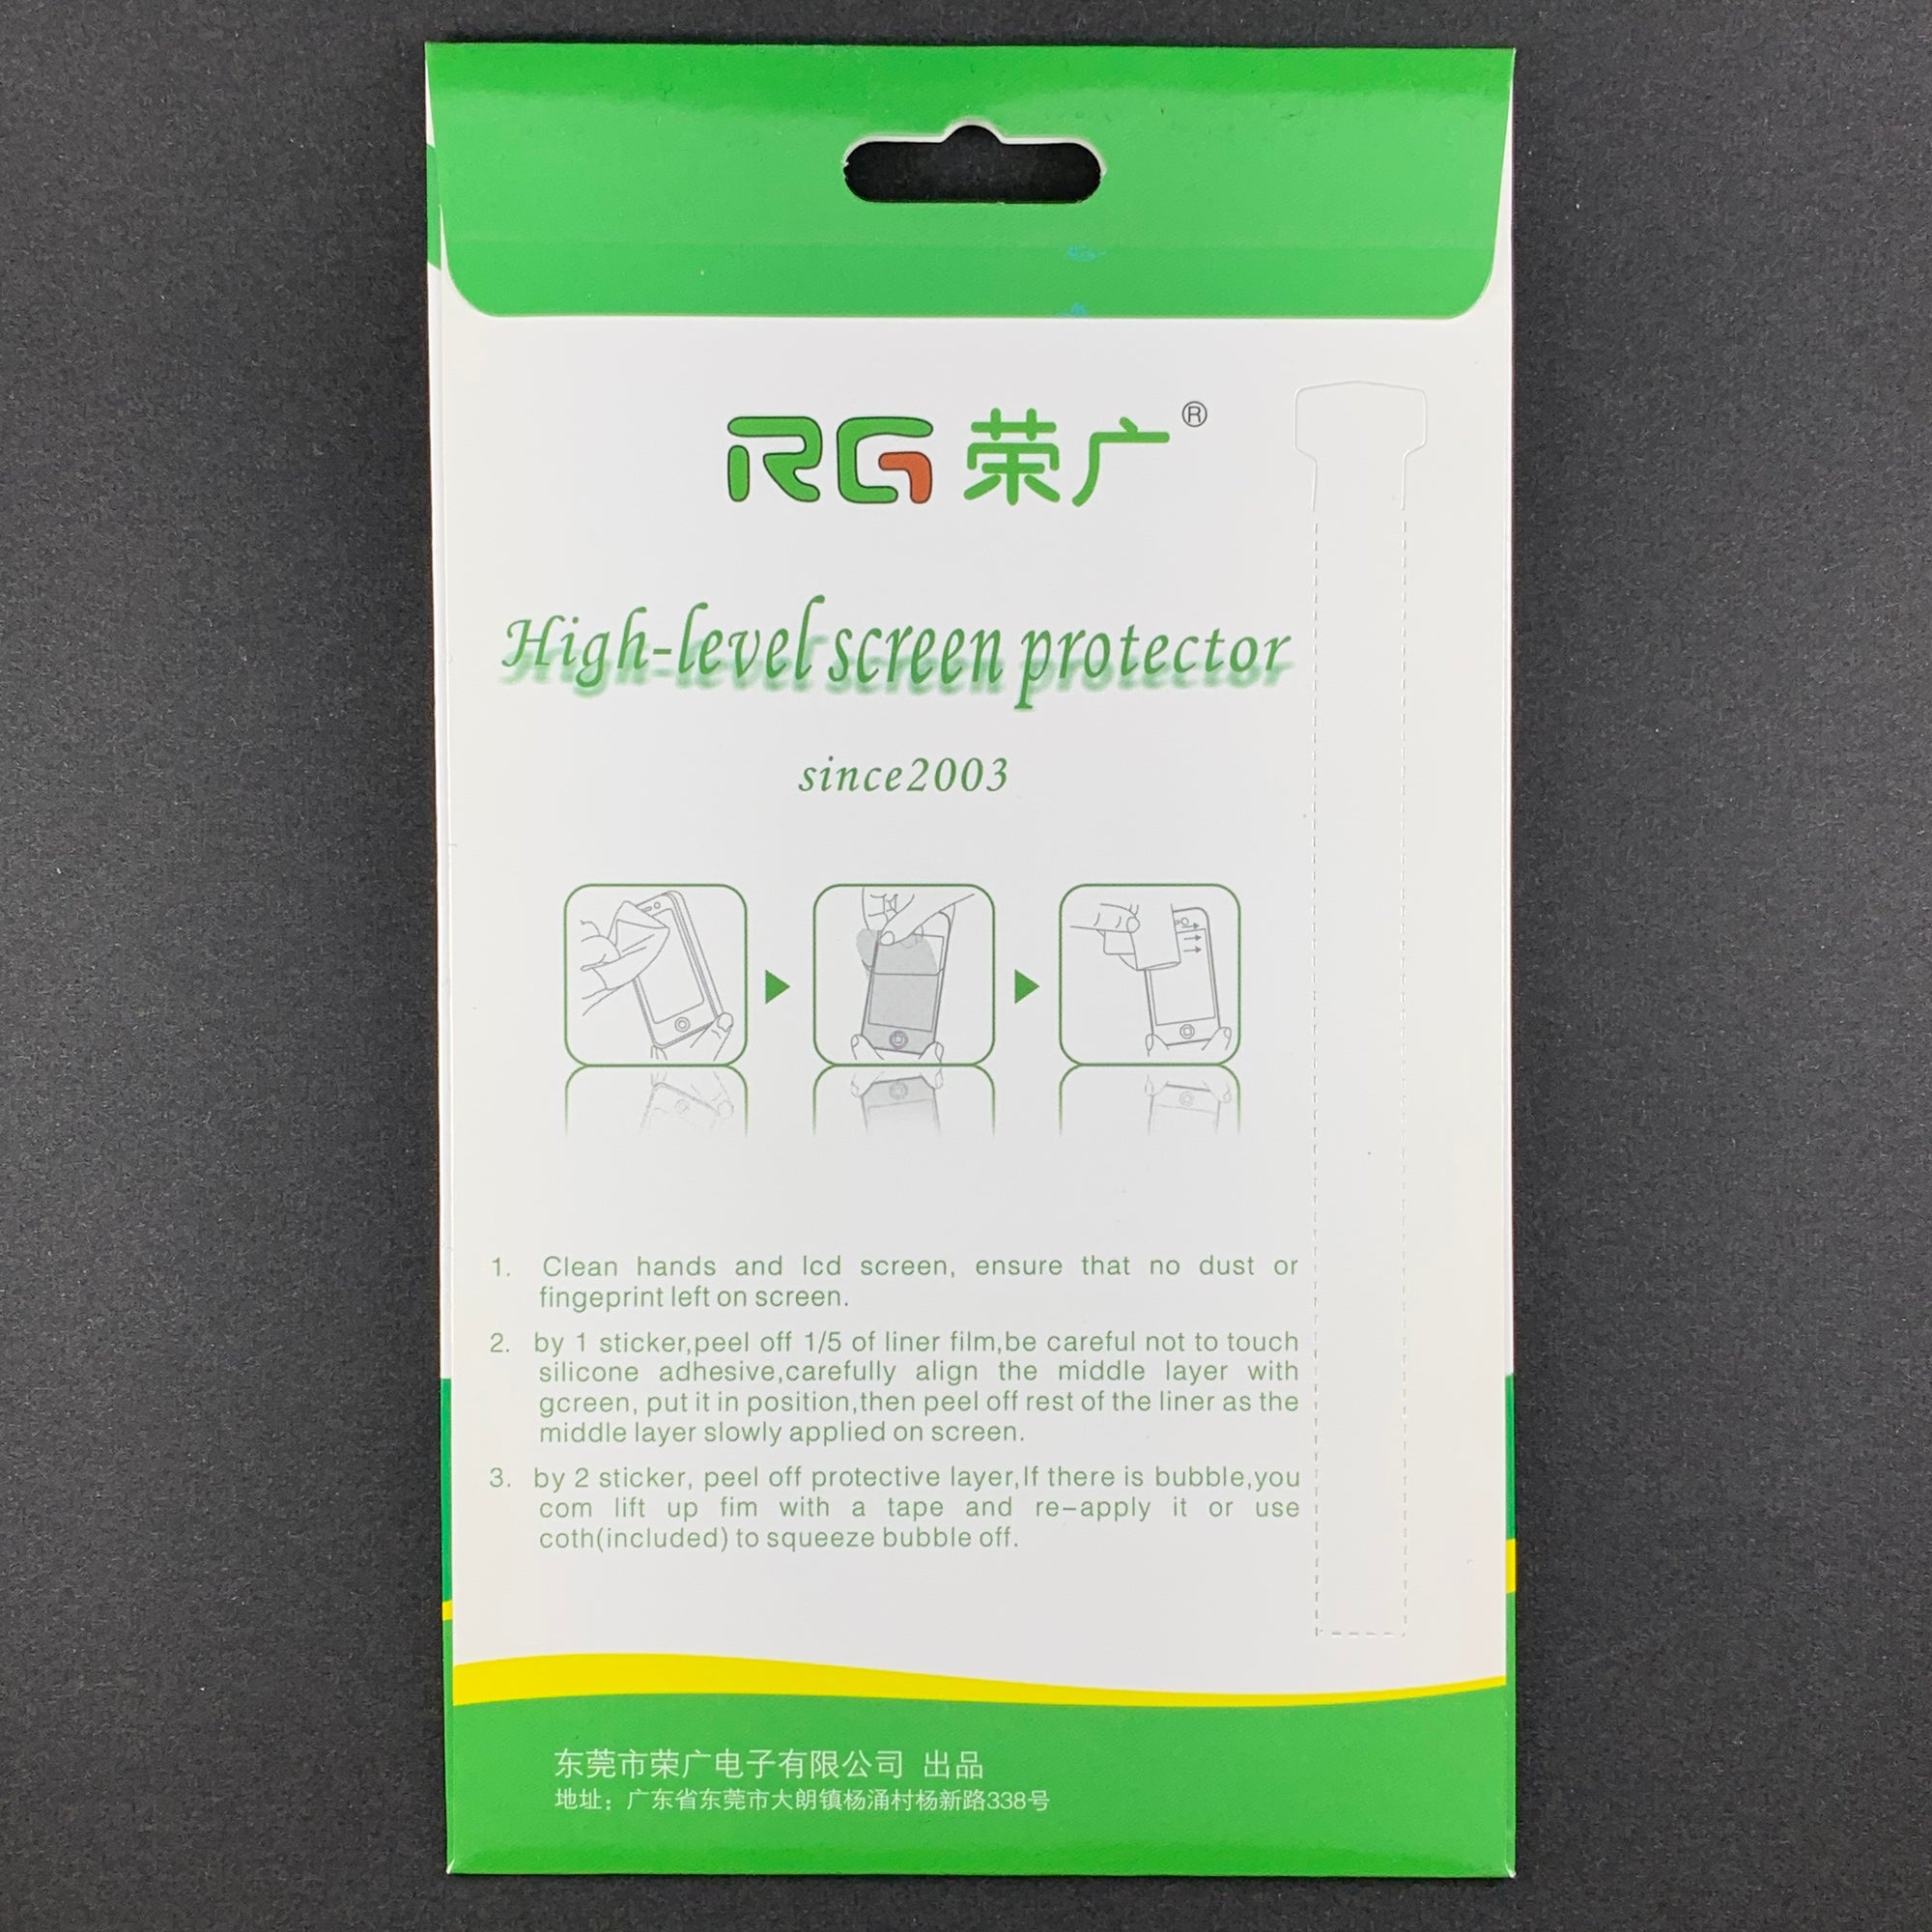 RG Professional Soft Film Screen Protector for iPad Mini 4 / 5 (CLEAR, 2-PACK)